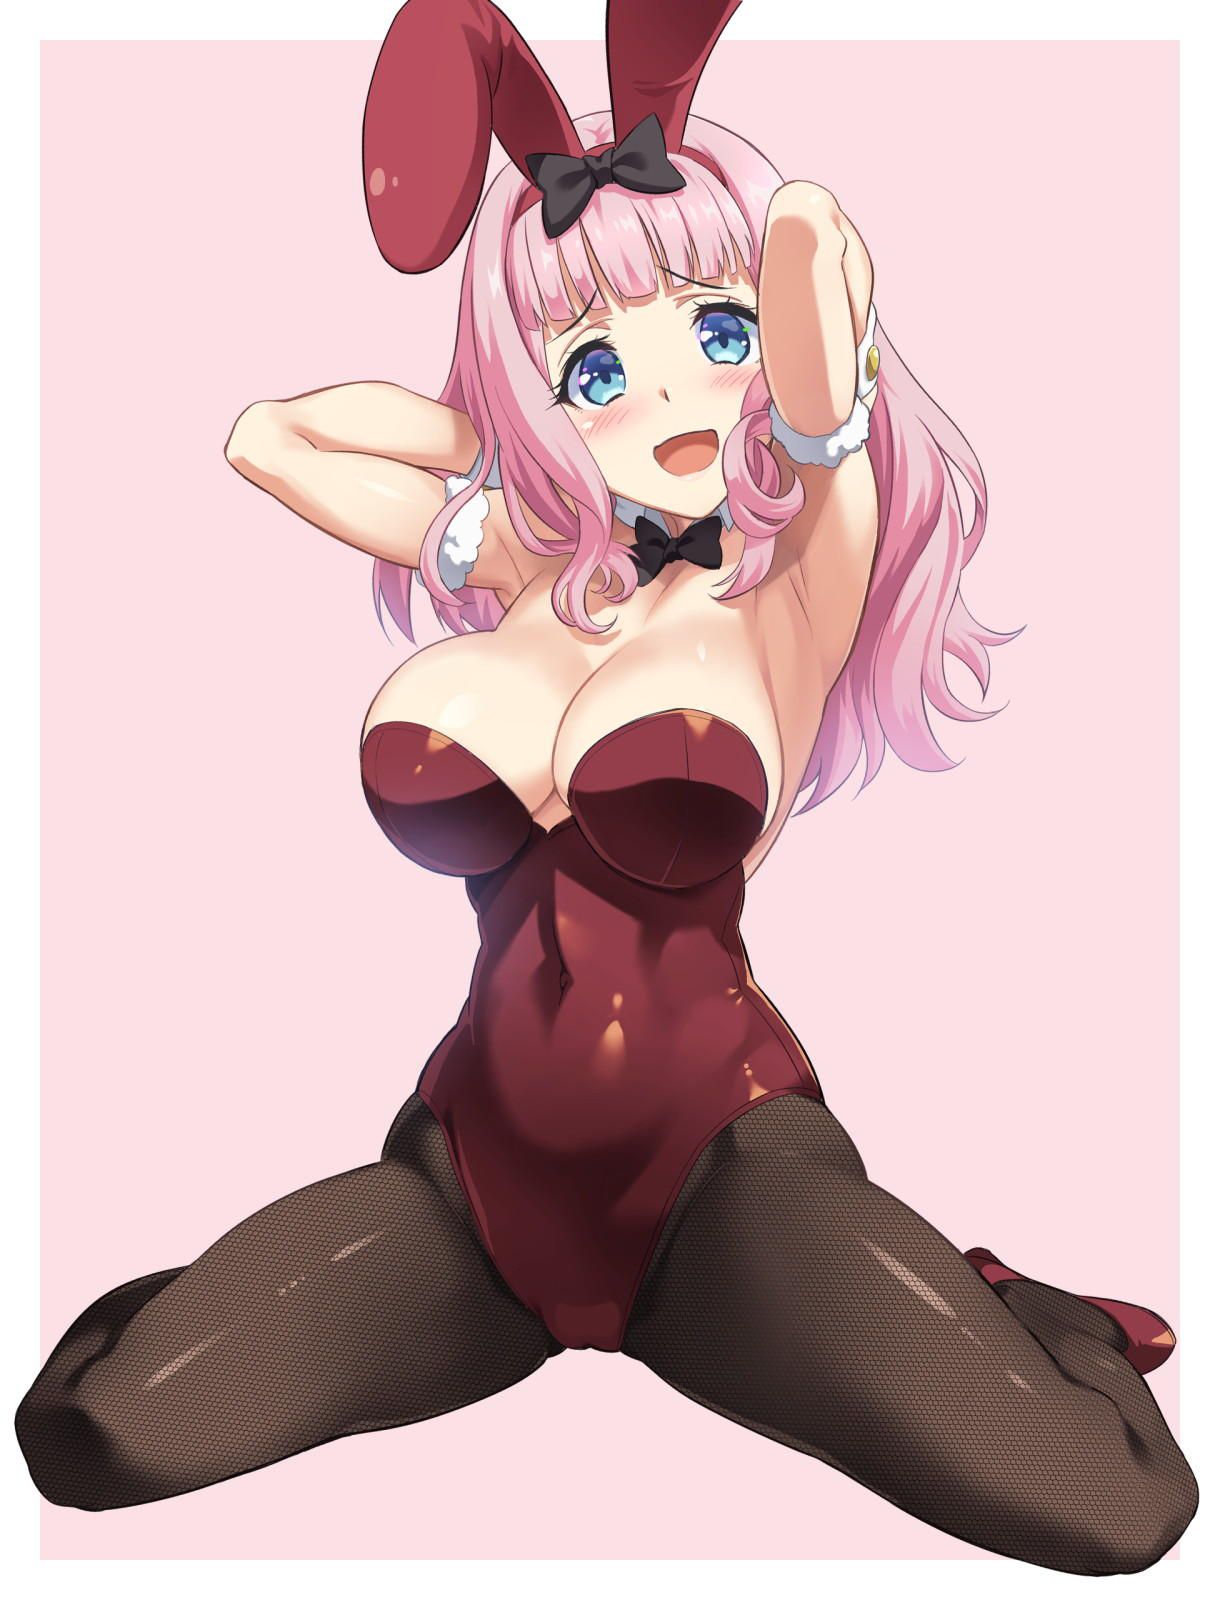 Get nasty and obscene images of bunny girls! 18